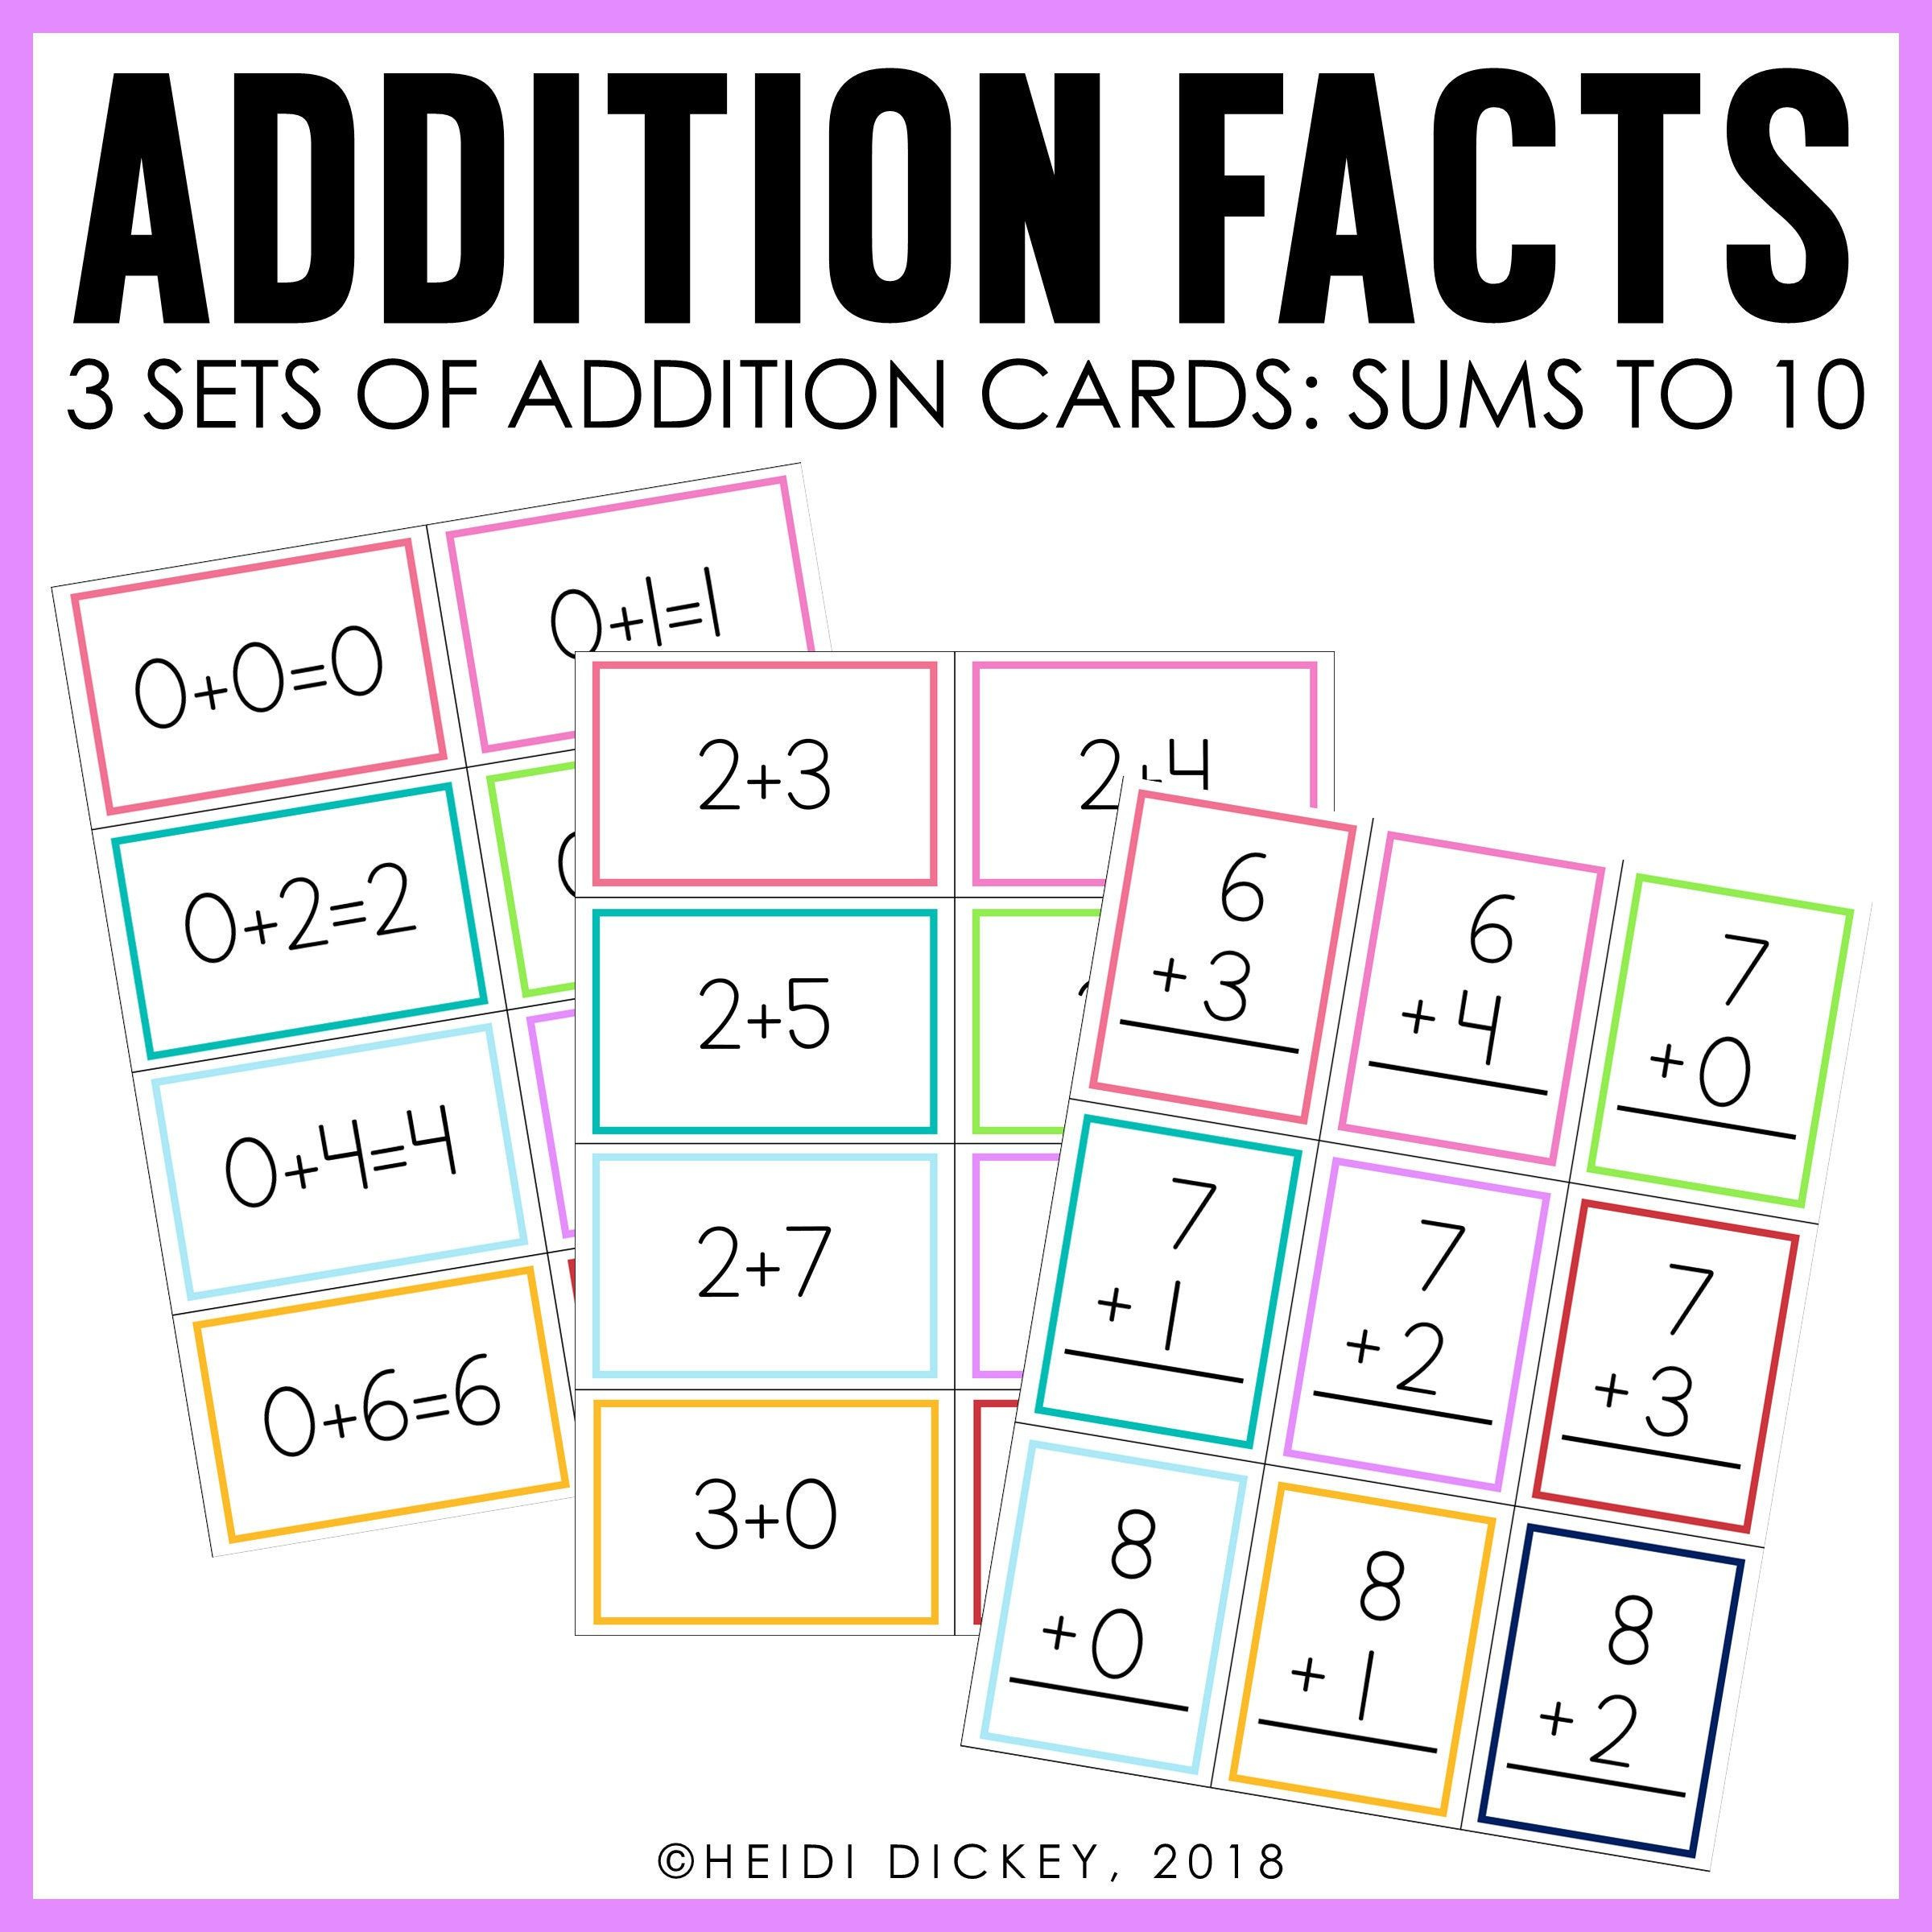 printable-addition-flash-cards-0-20-cards-info